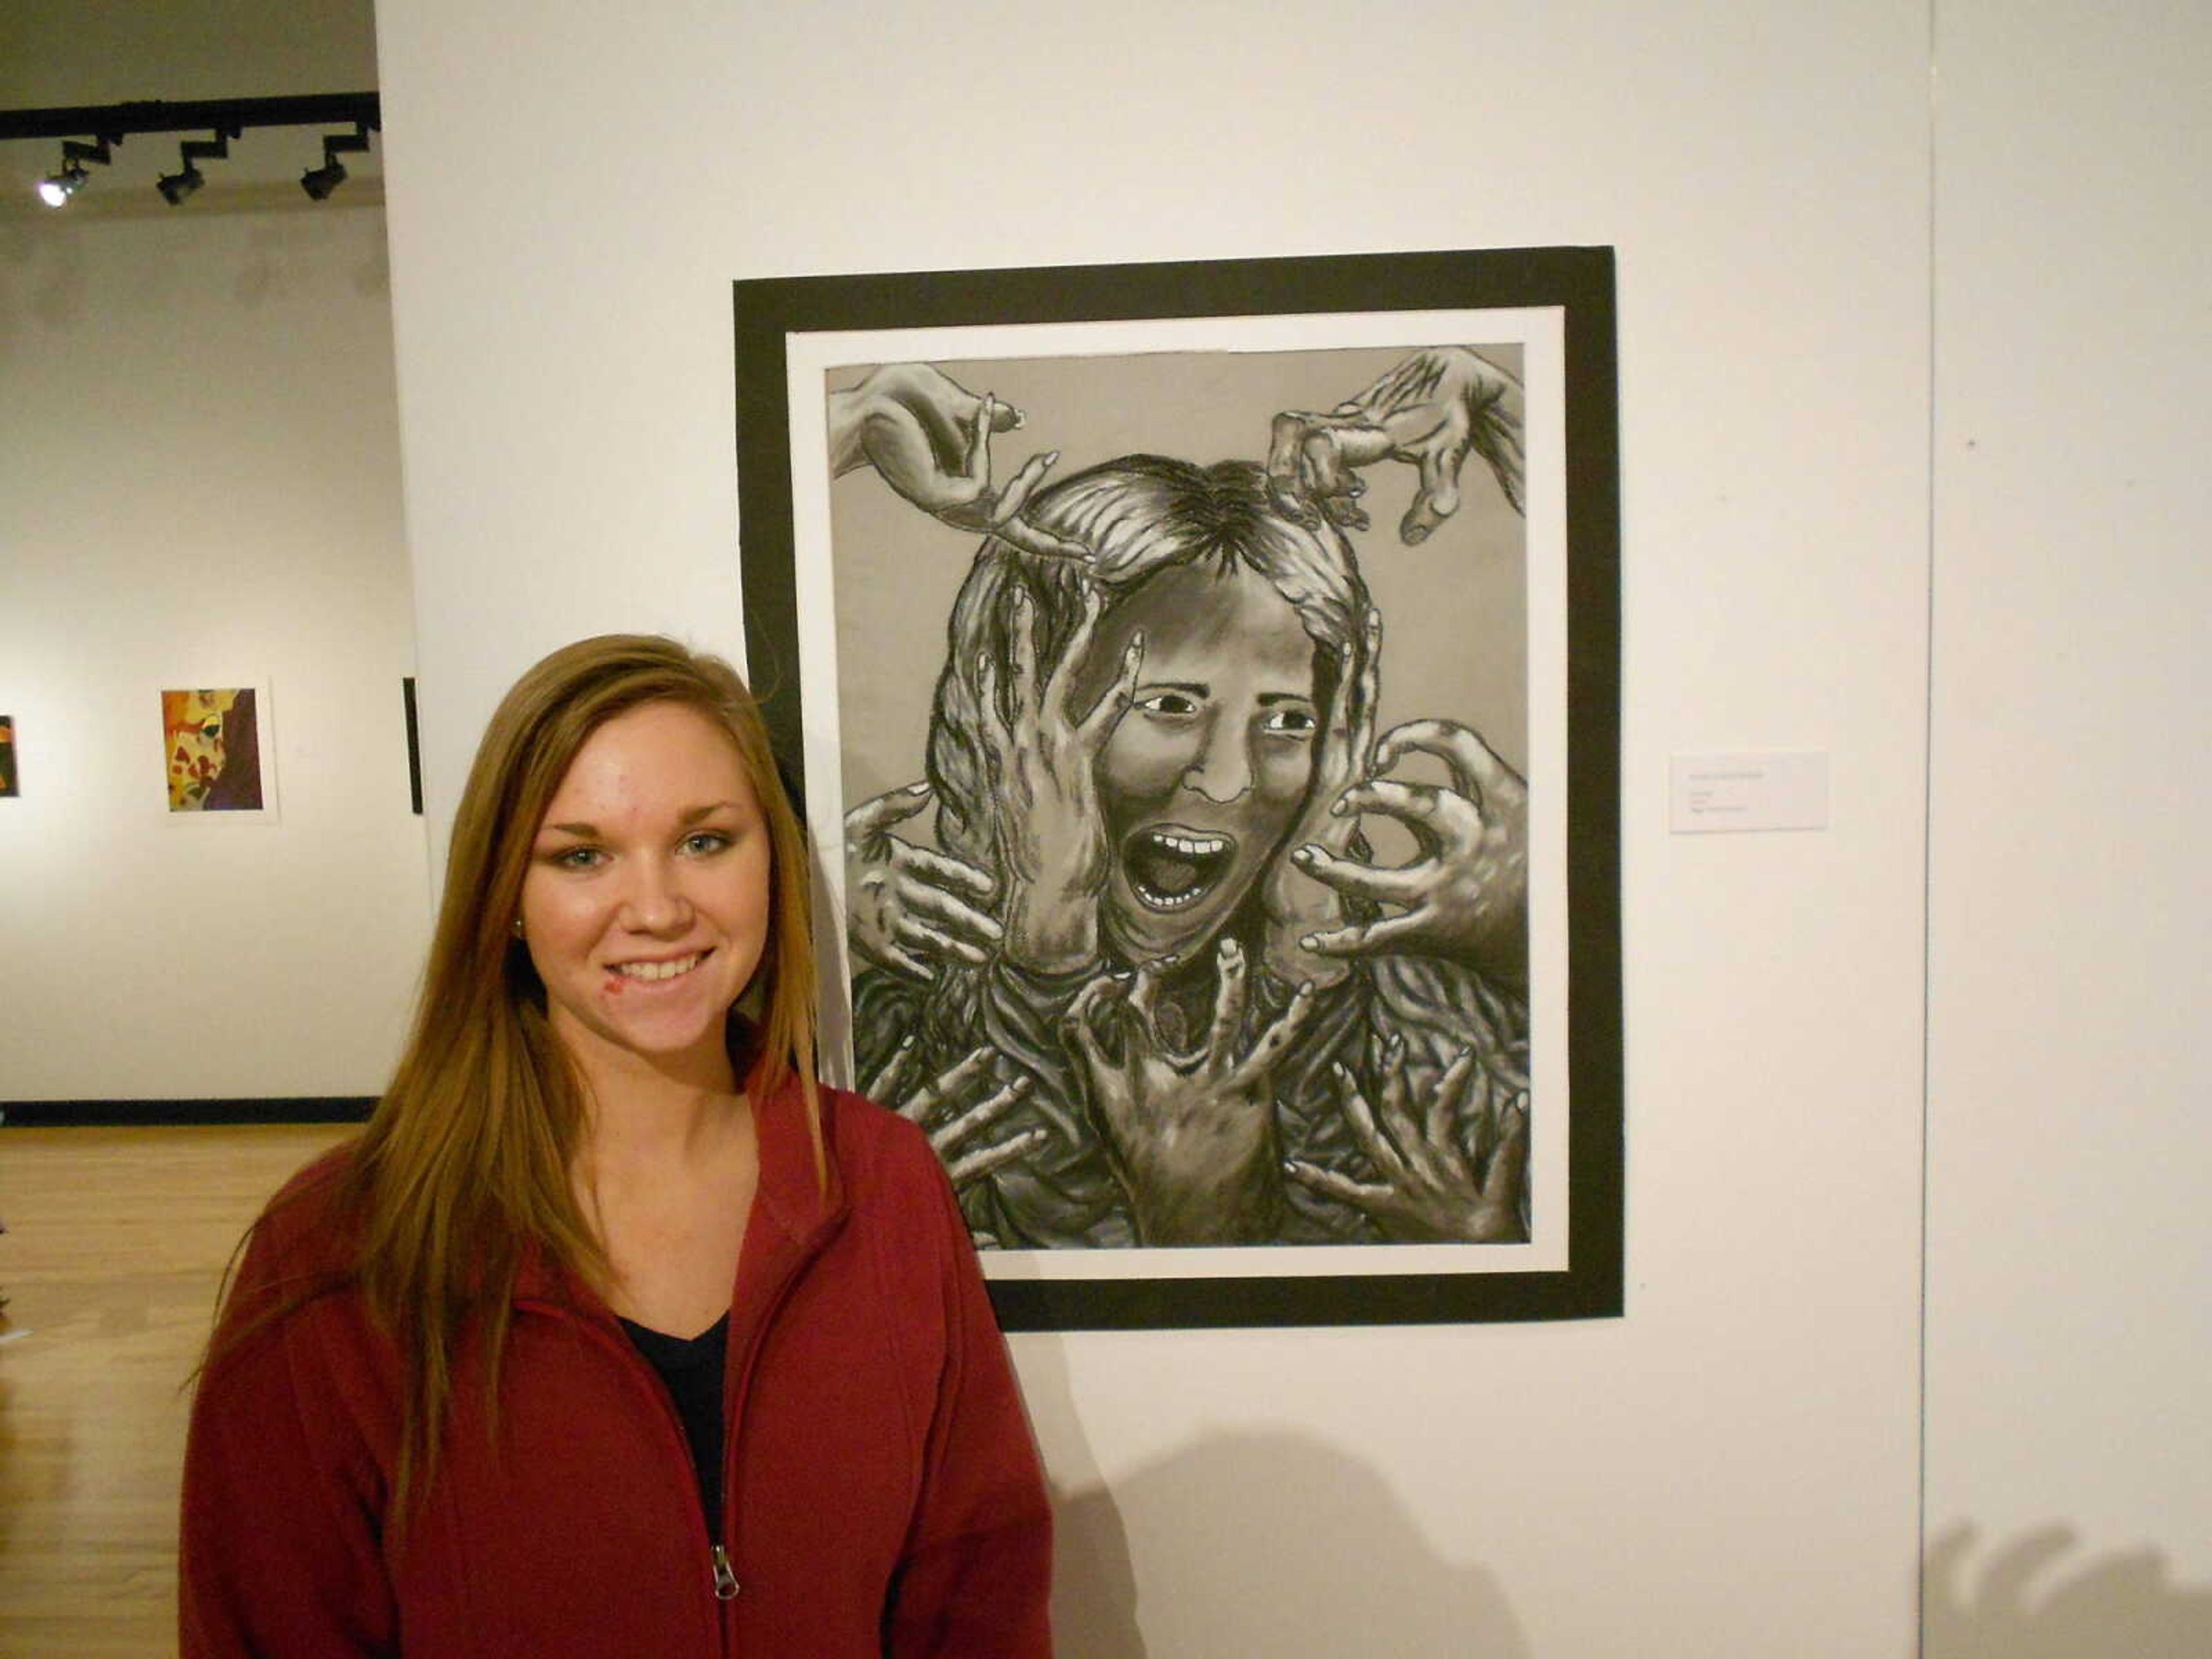 High school students show off their art work at art exhibition